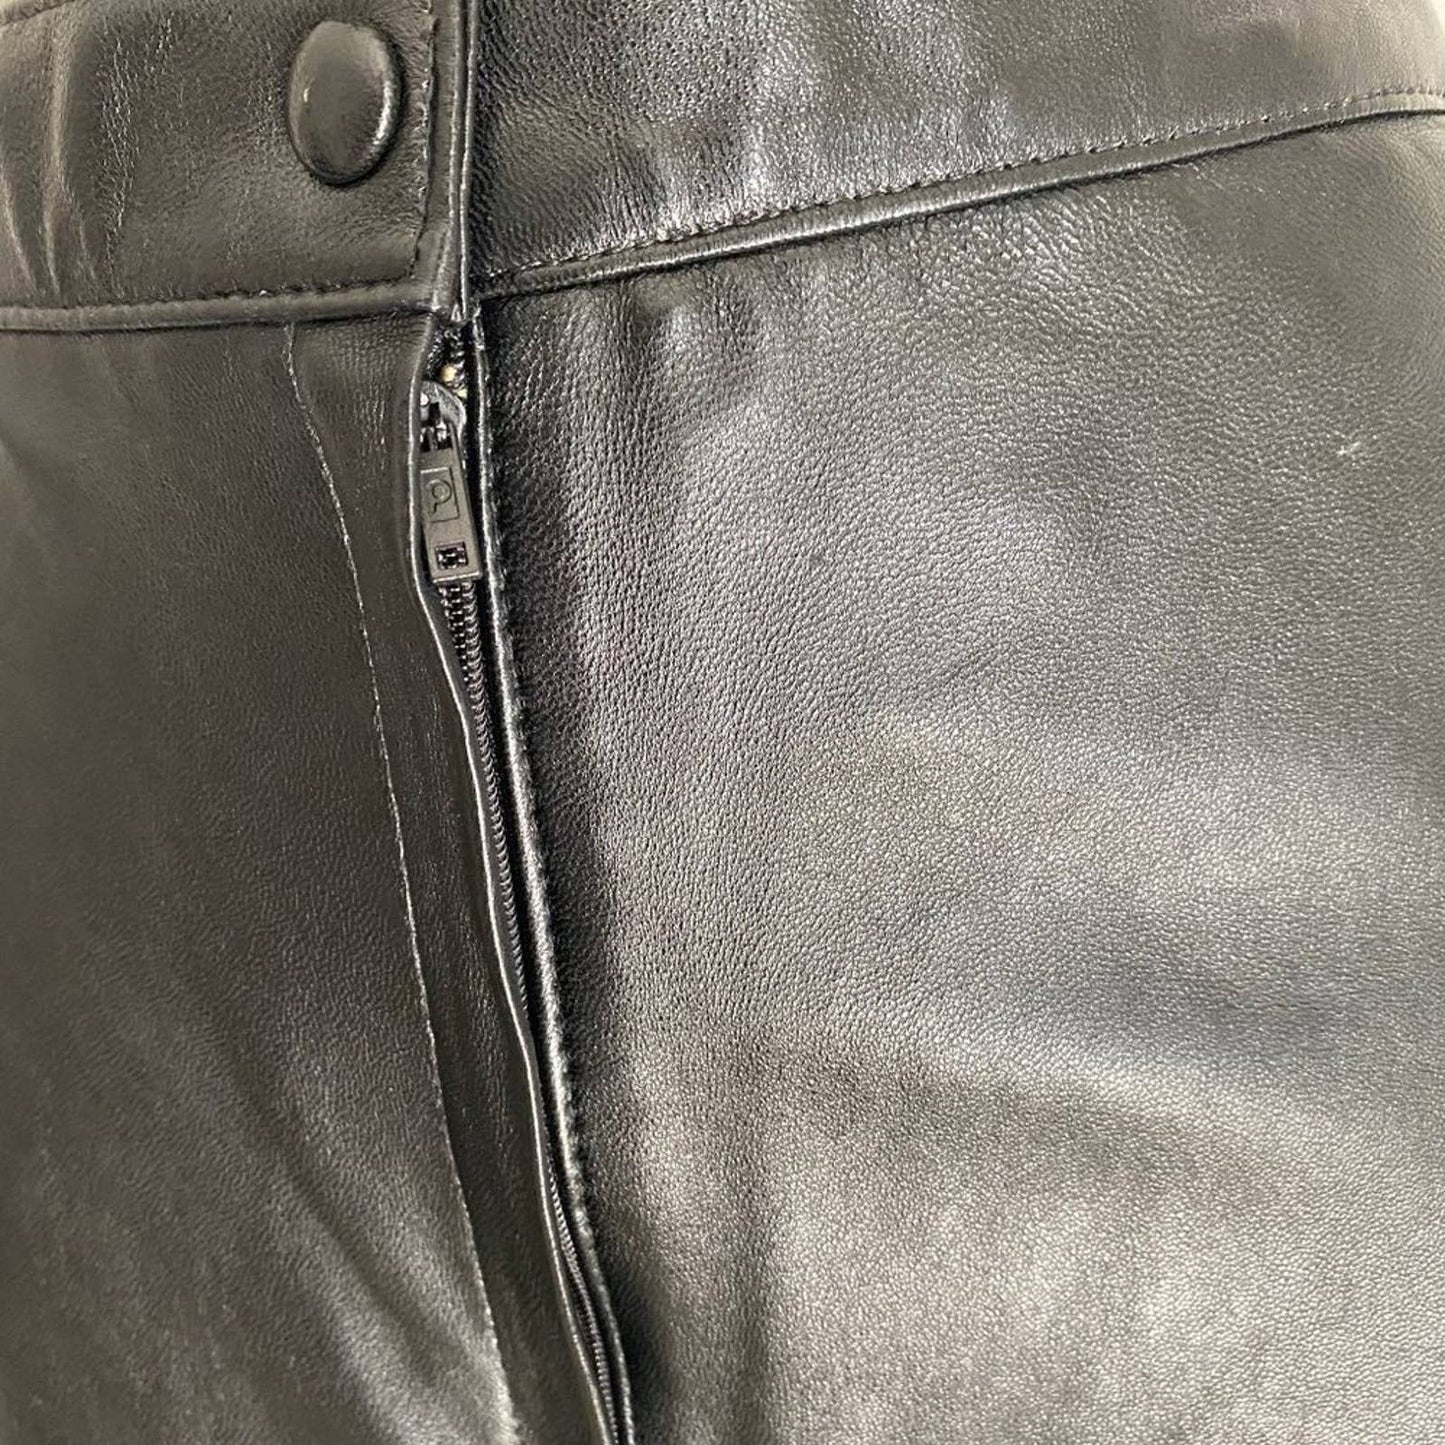 Zana Couture sz 12  High rise VINTAGE 80s 90s 100% Leather pants